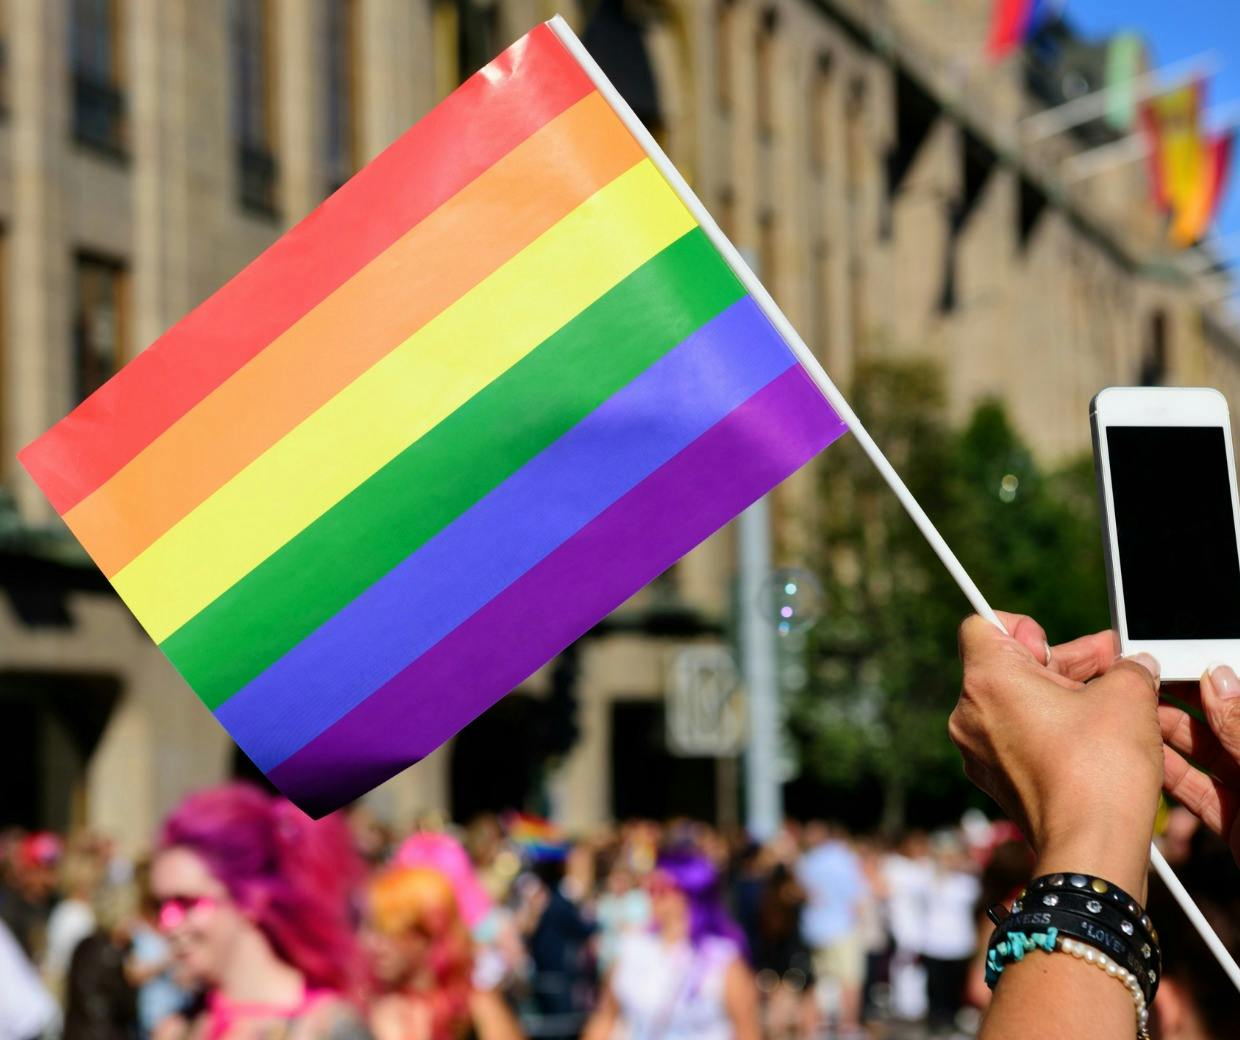 LGBTQ+ community ‘least well represented’ in advertising
